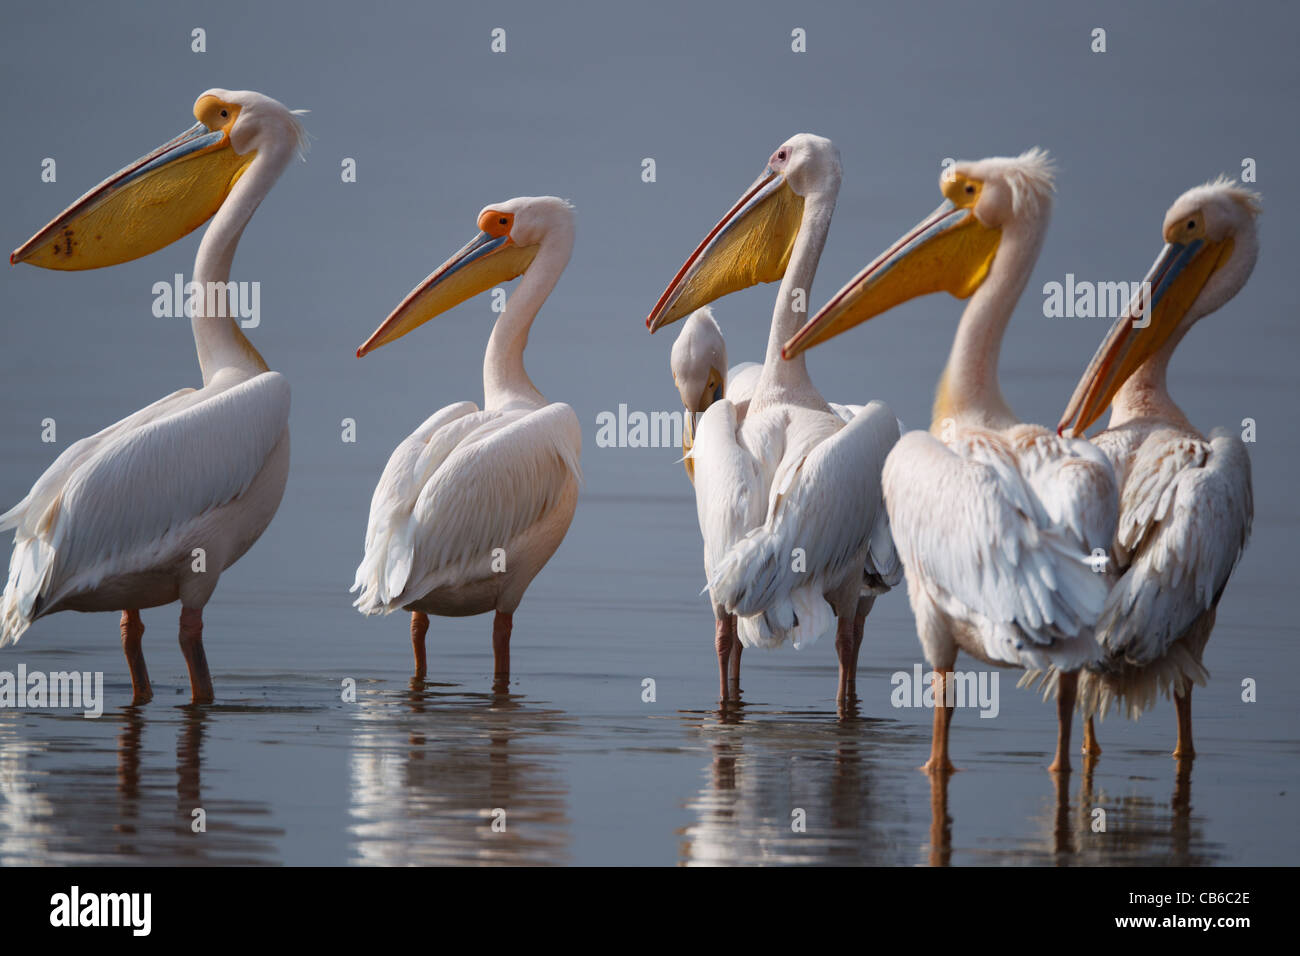 Flamingoes in shallow water,Kenya,Africa Stock Photo